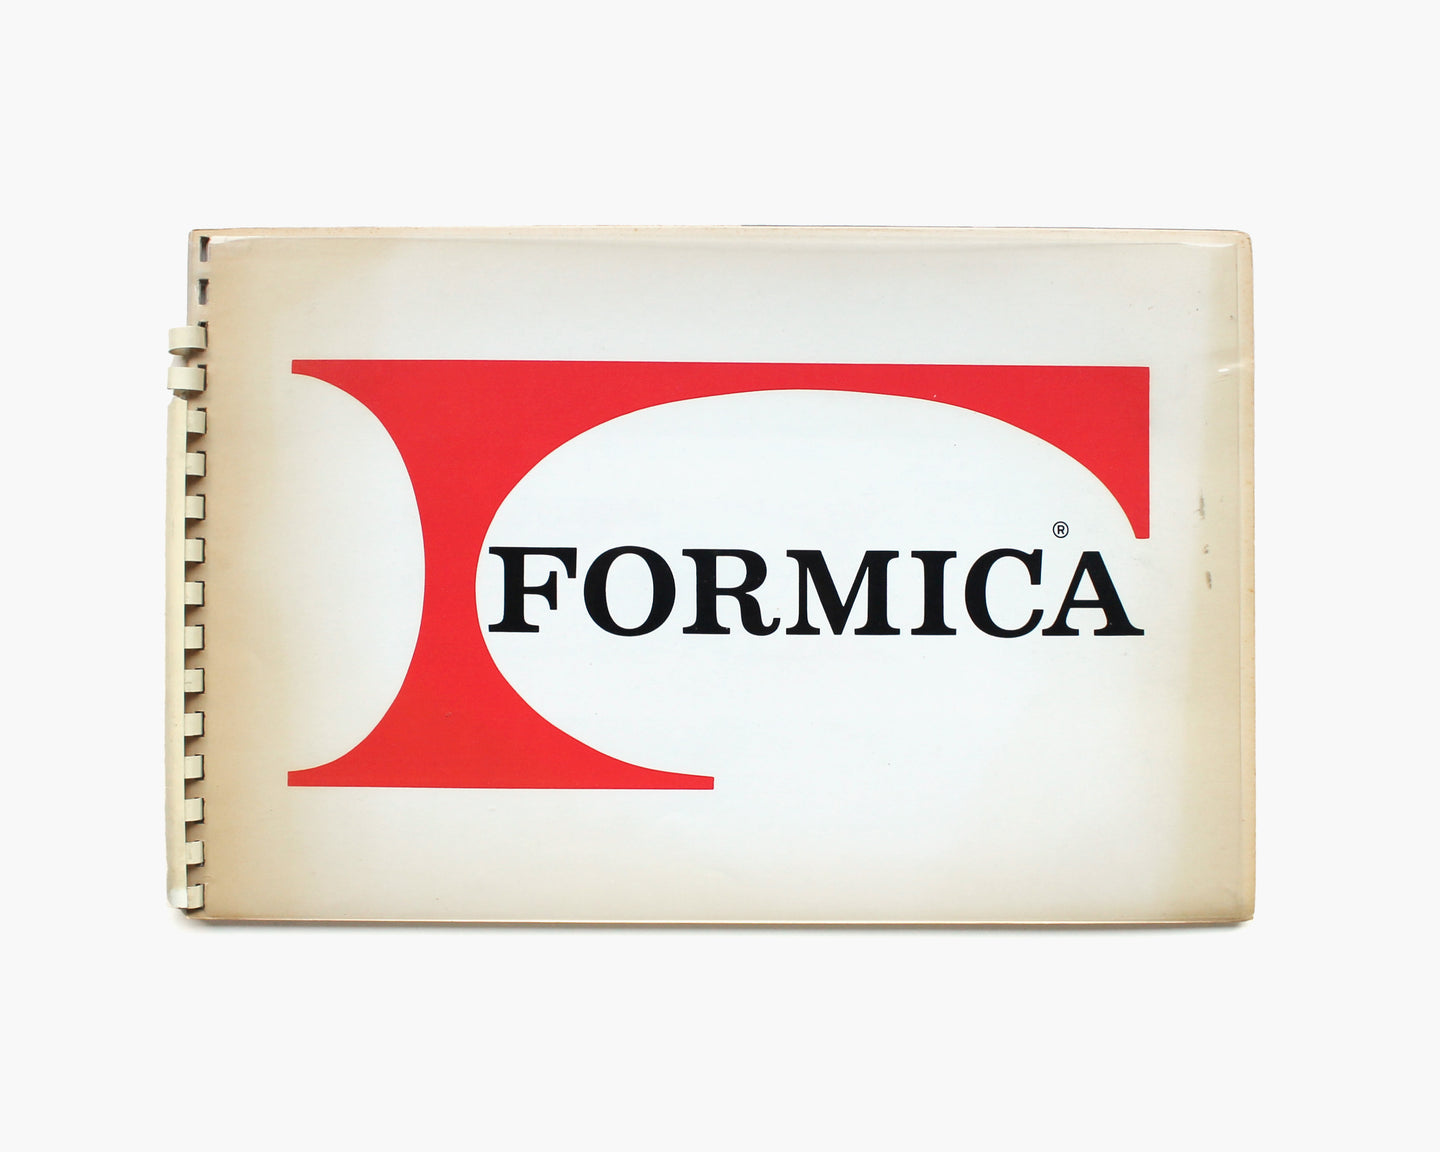 The Use of the Formica Symbol Manual [Raymond Loewy et al.]